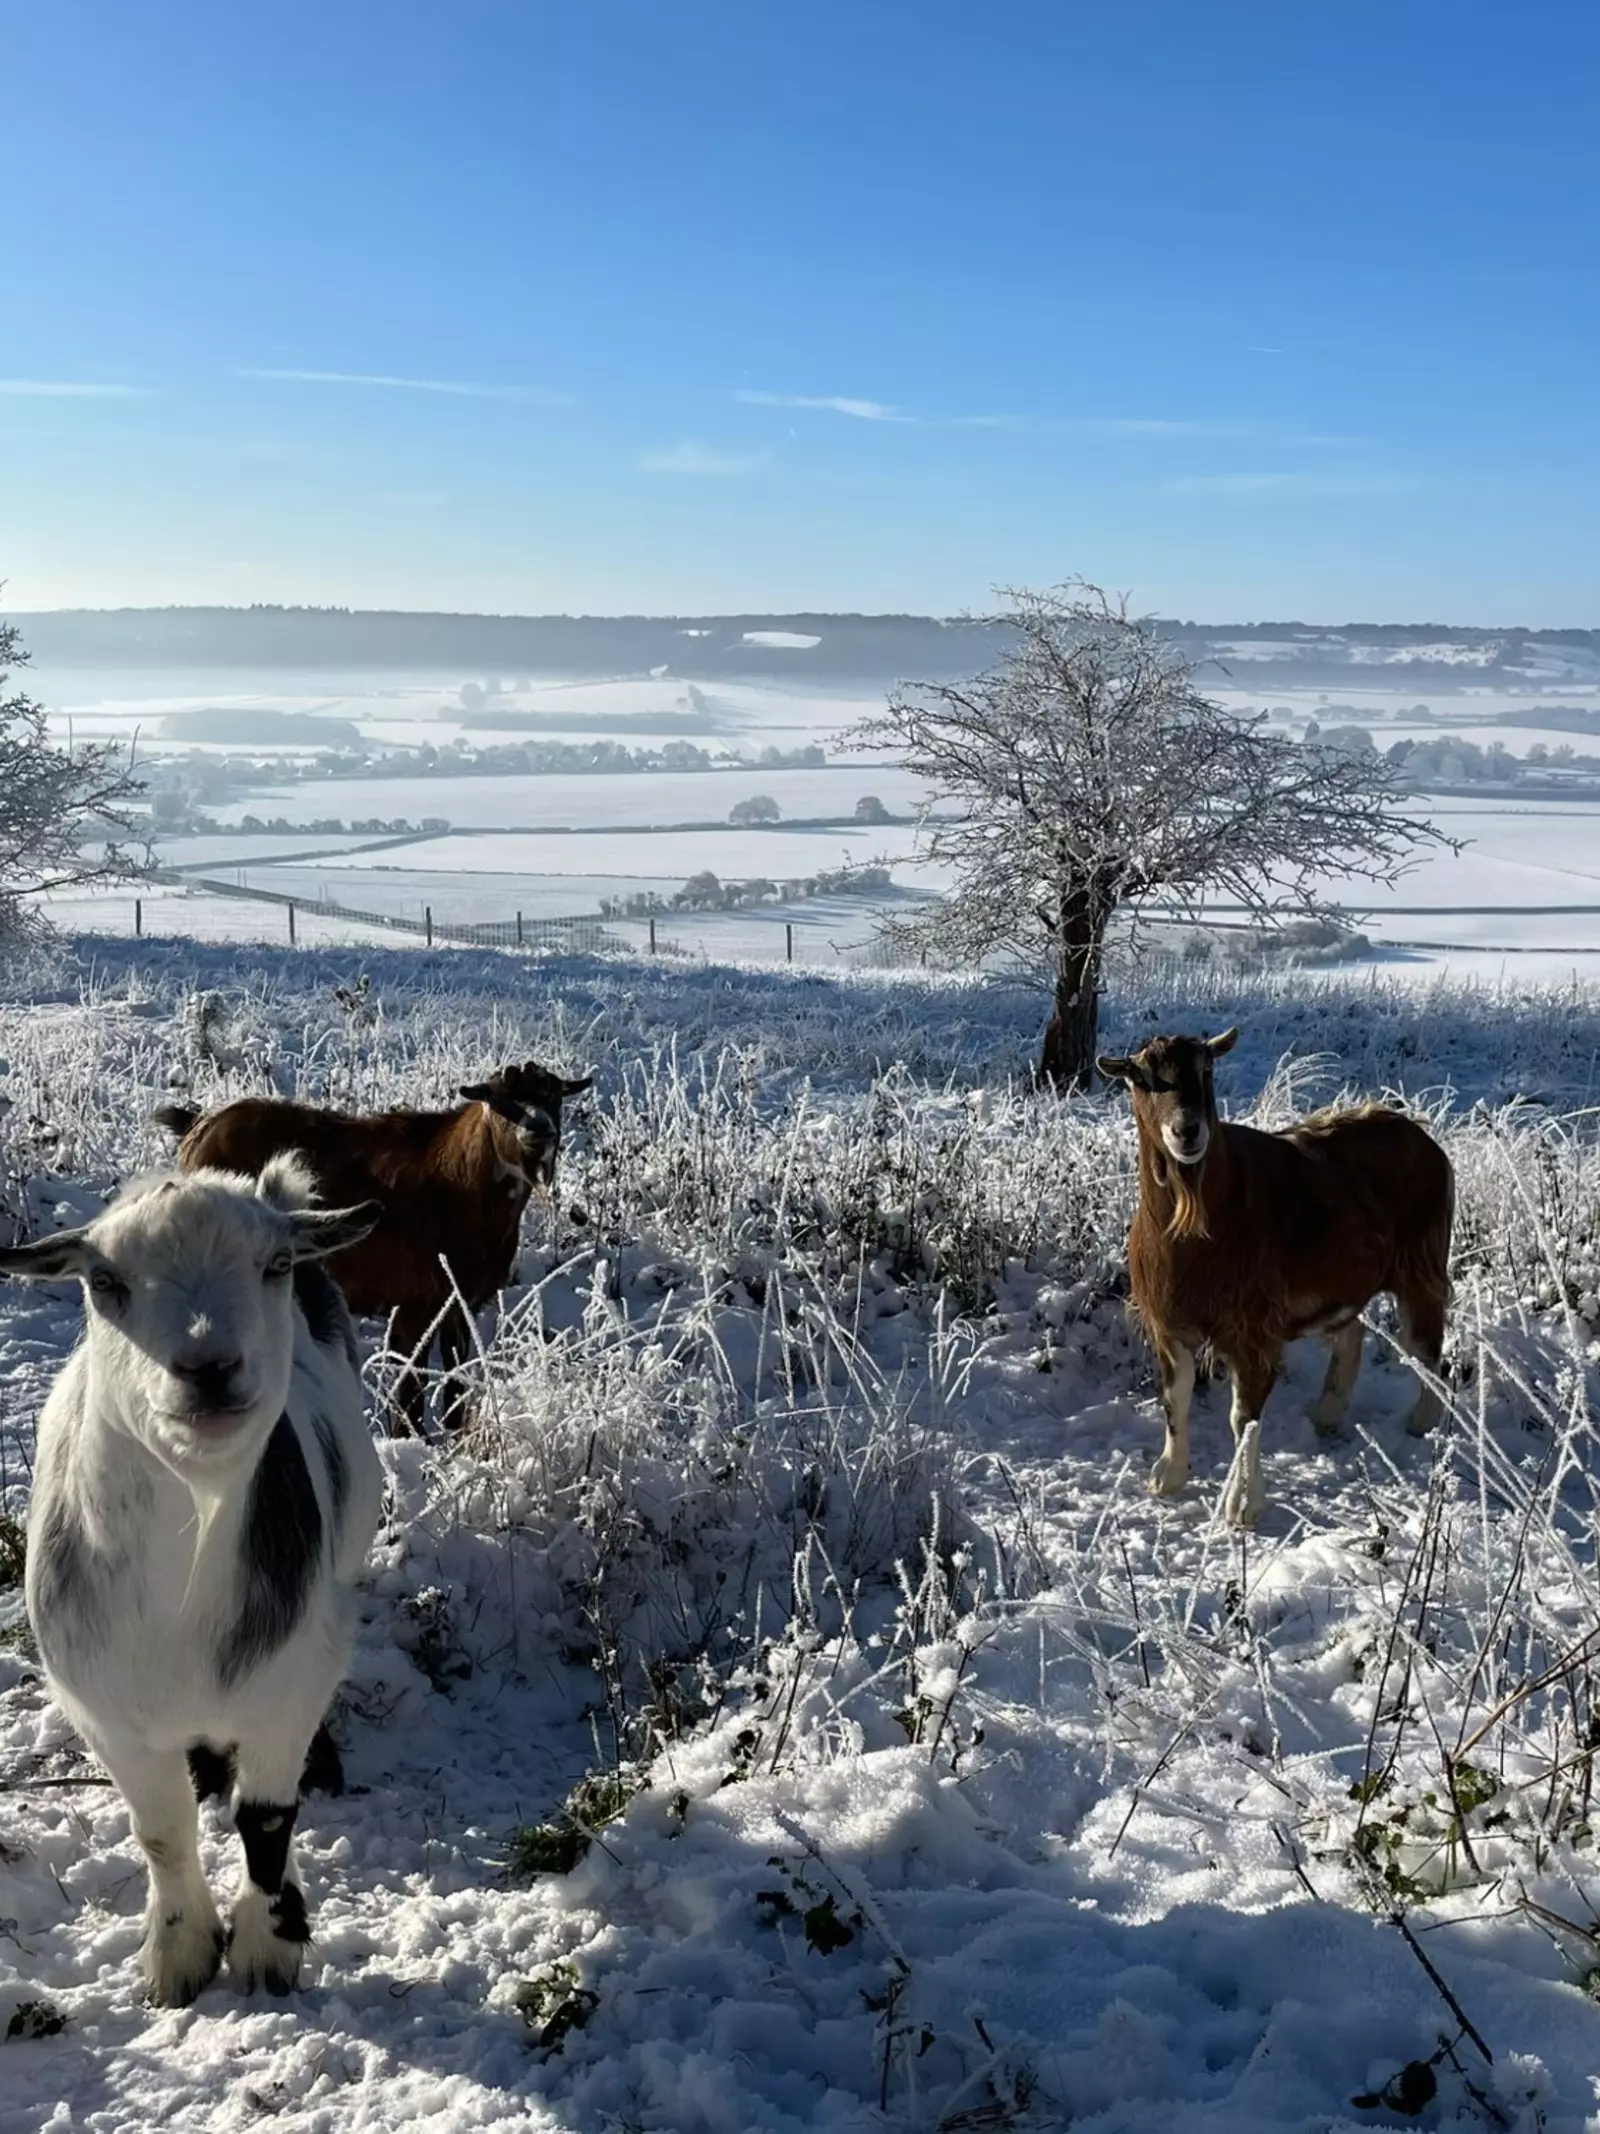 Goats in the snow at Whipsnade Zoo